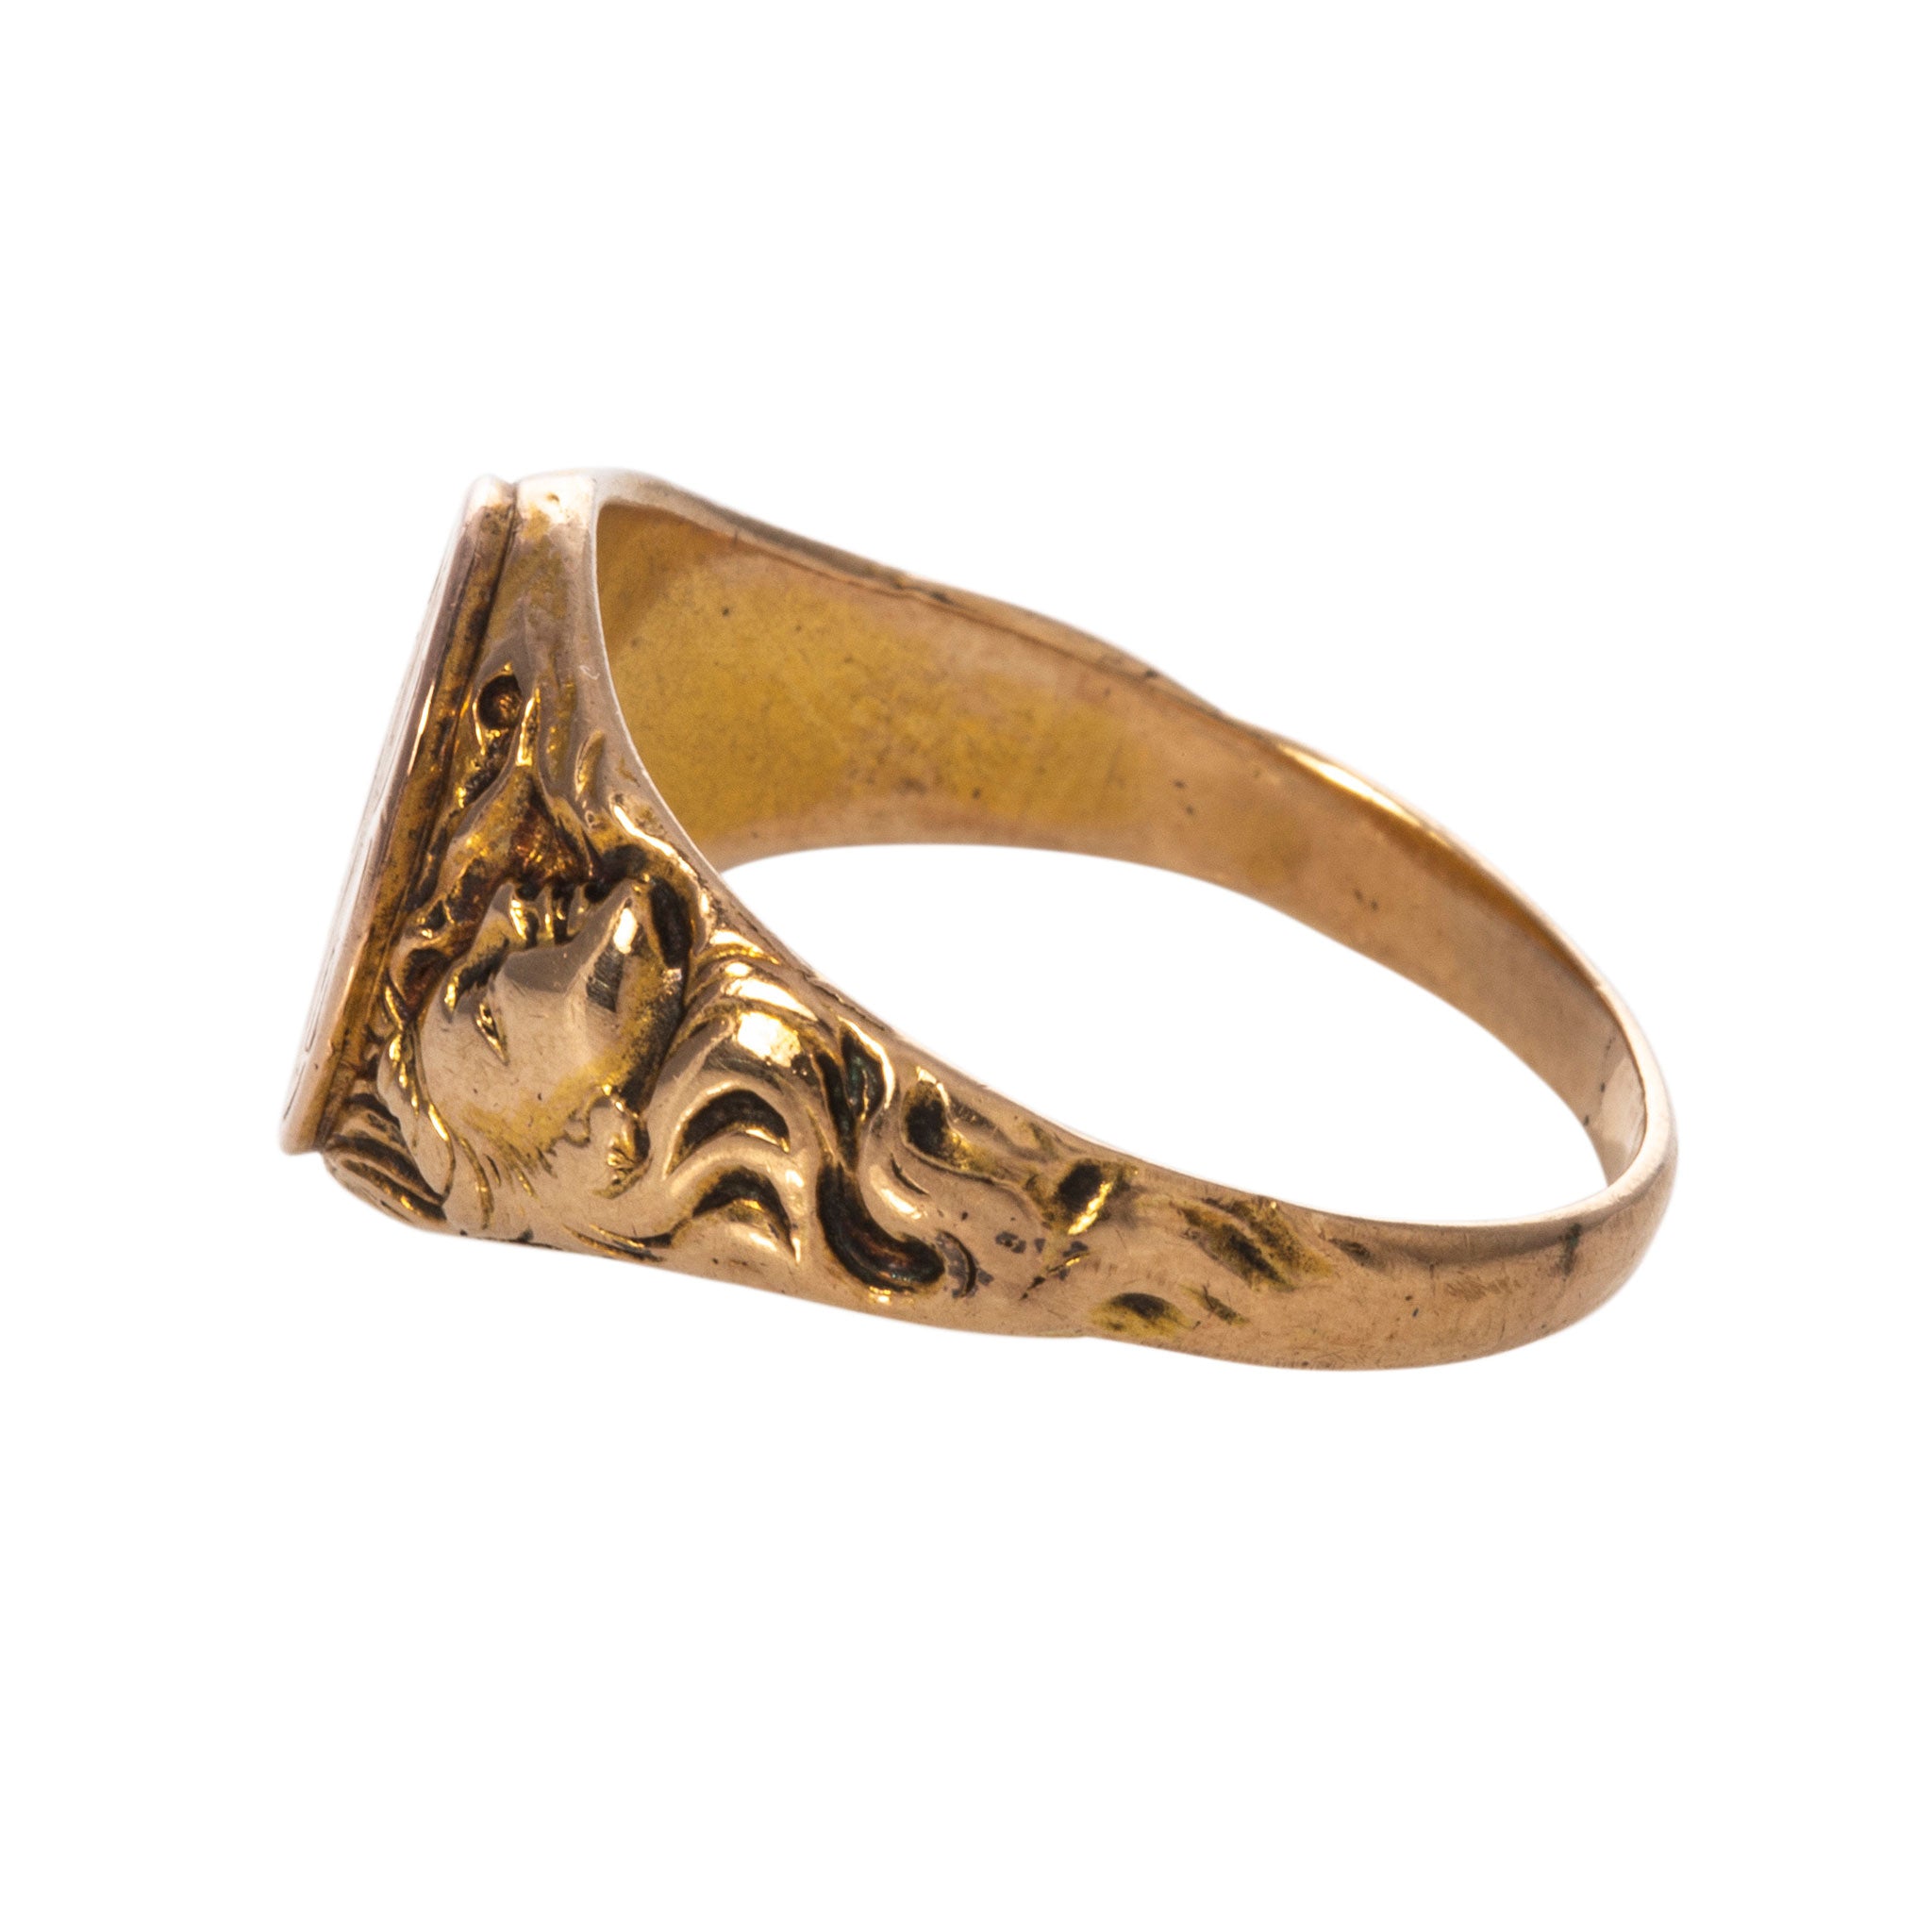 Art Nouveau 14K Yellow Gold Engraved Oval Signet Ring